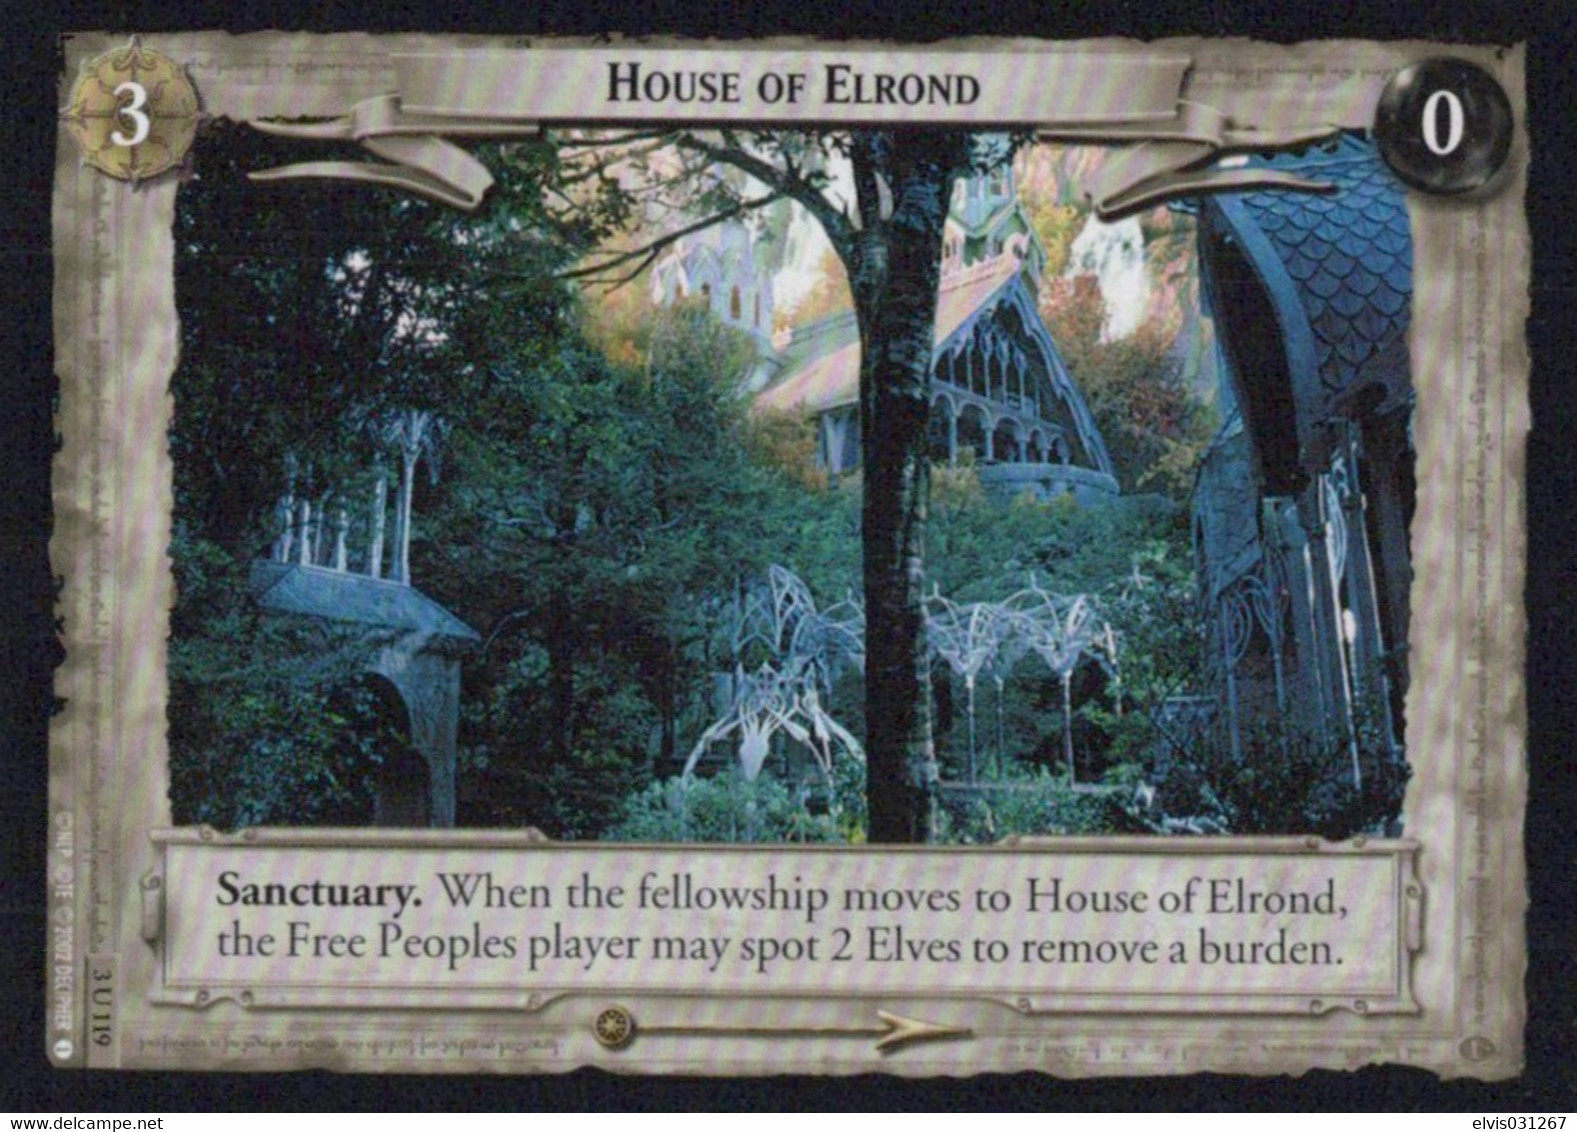 Vintage The Lord Of The Rings: #0-3 House Of Elrond - EN - 2001-2004 - Mint Condition - Trading Card Game - Lord Of The Rings